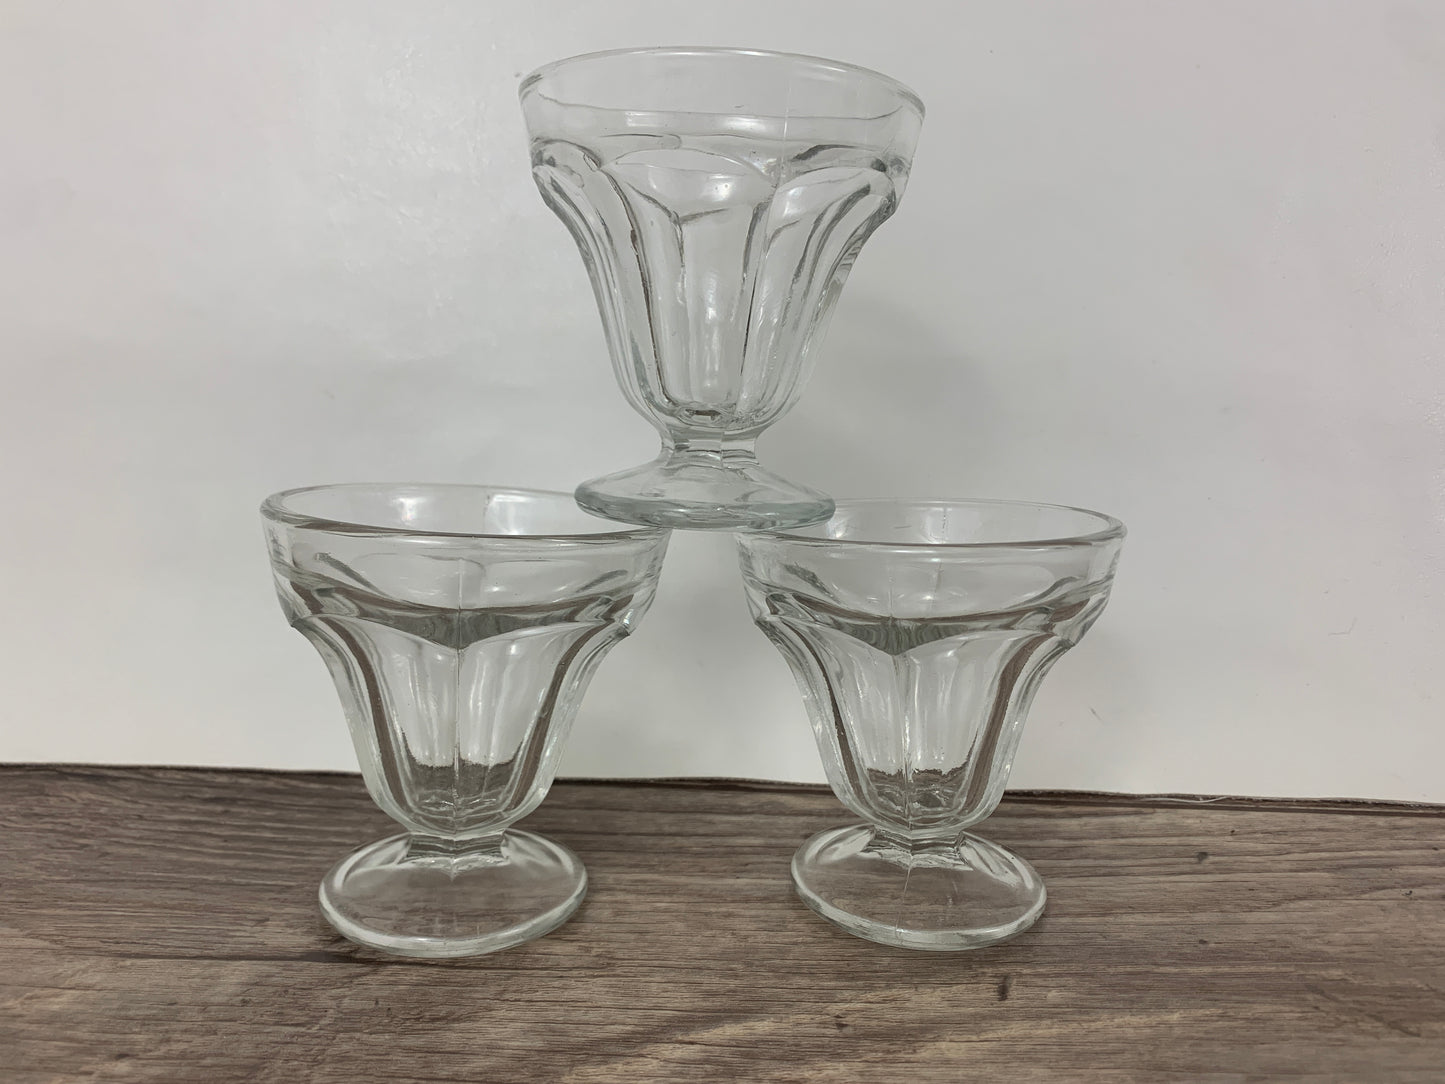 Small Sundae Cups, Vintage Clear Glass Ice Cream Cups, Set of 3 Small Ice Cream Glasses